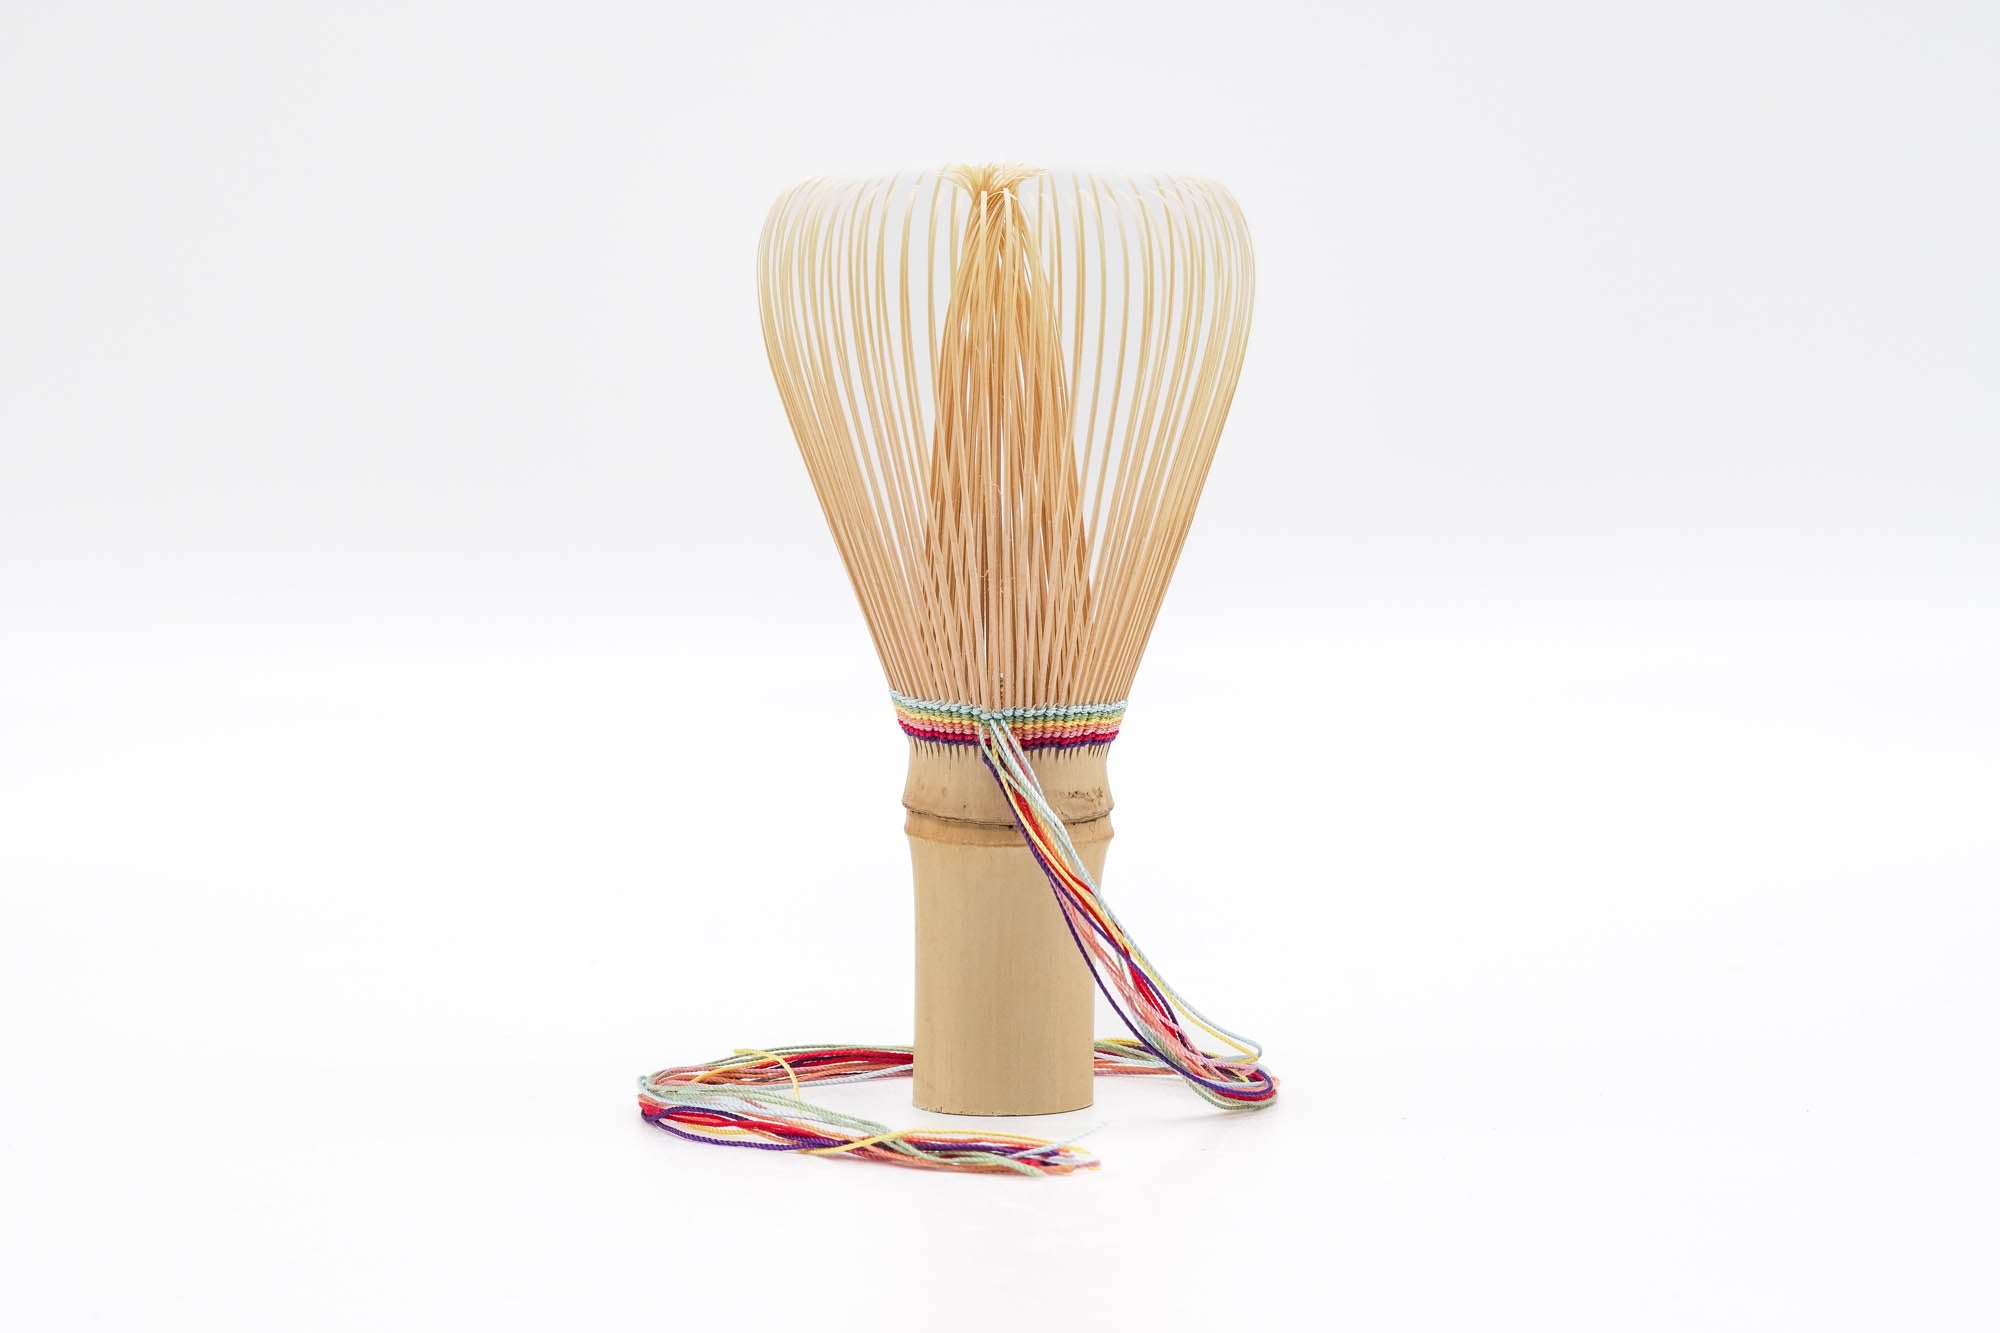 Suikaen Artisan Matcha Whisk, Whisk rest, and Sieve from Tsubame